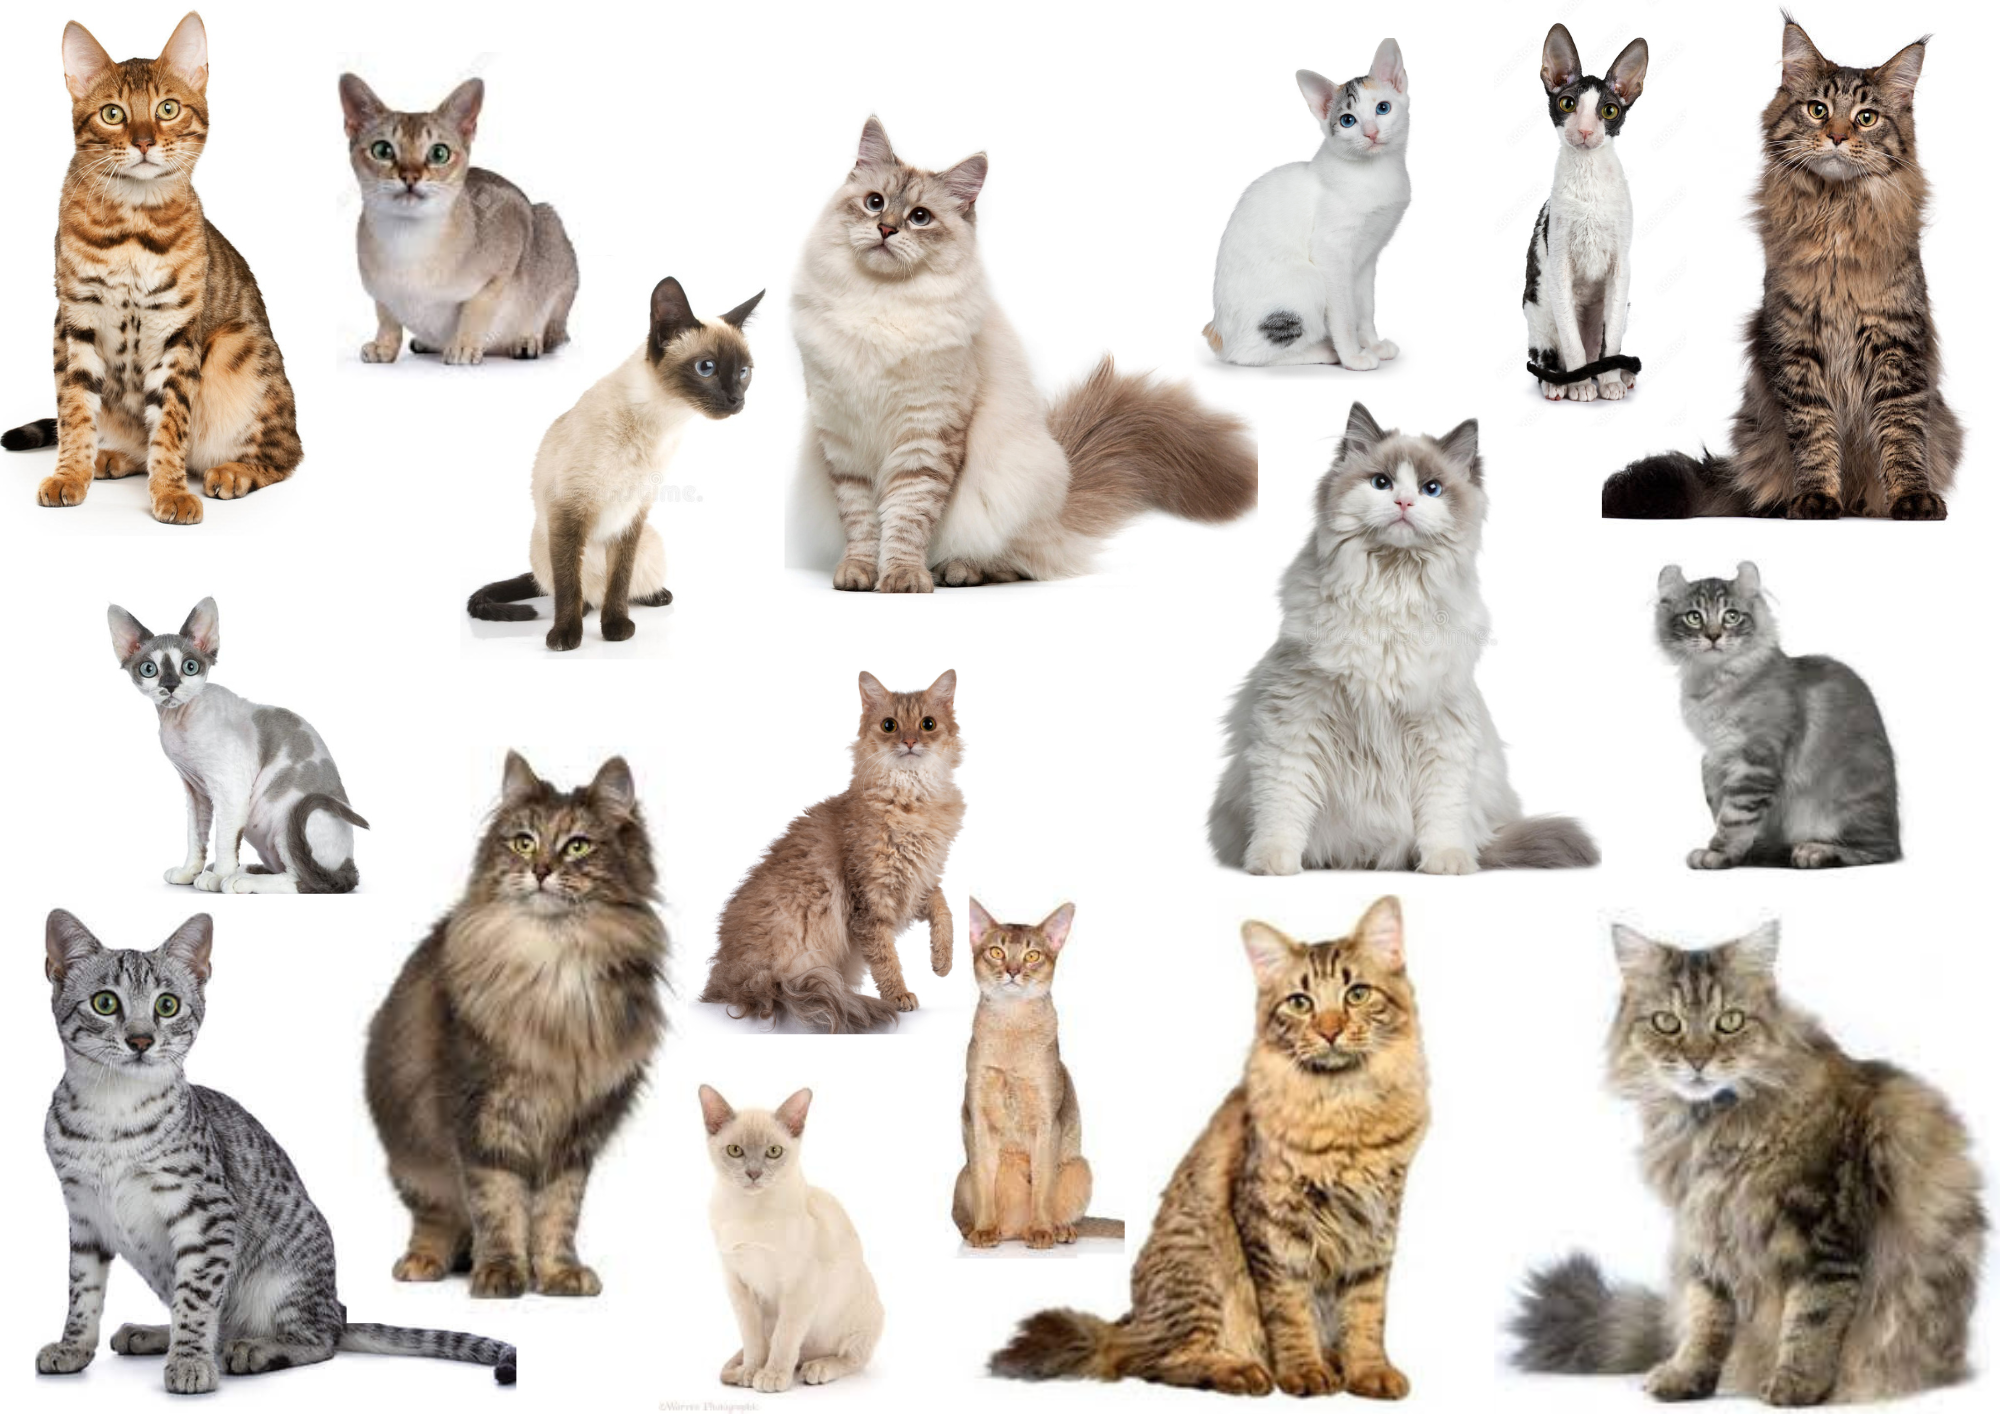 Identifying Your Cat’s Breeds: A Simple Guide